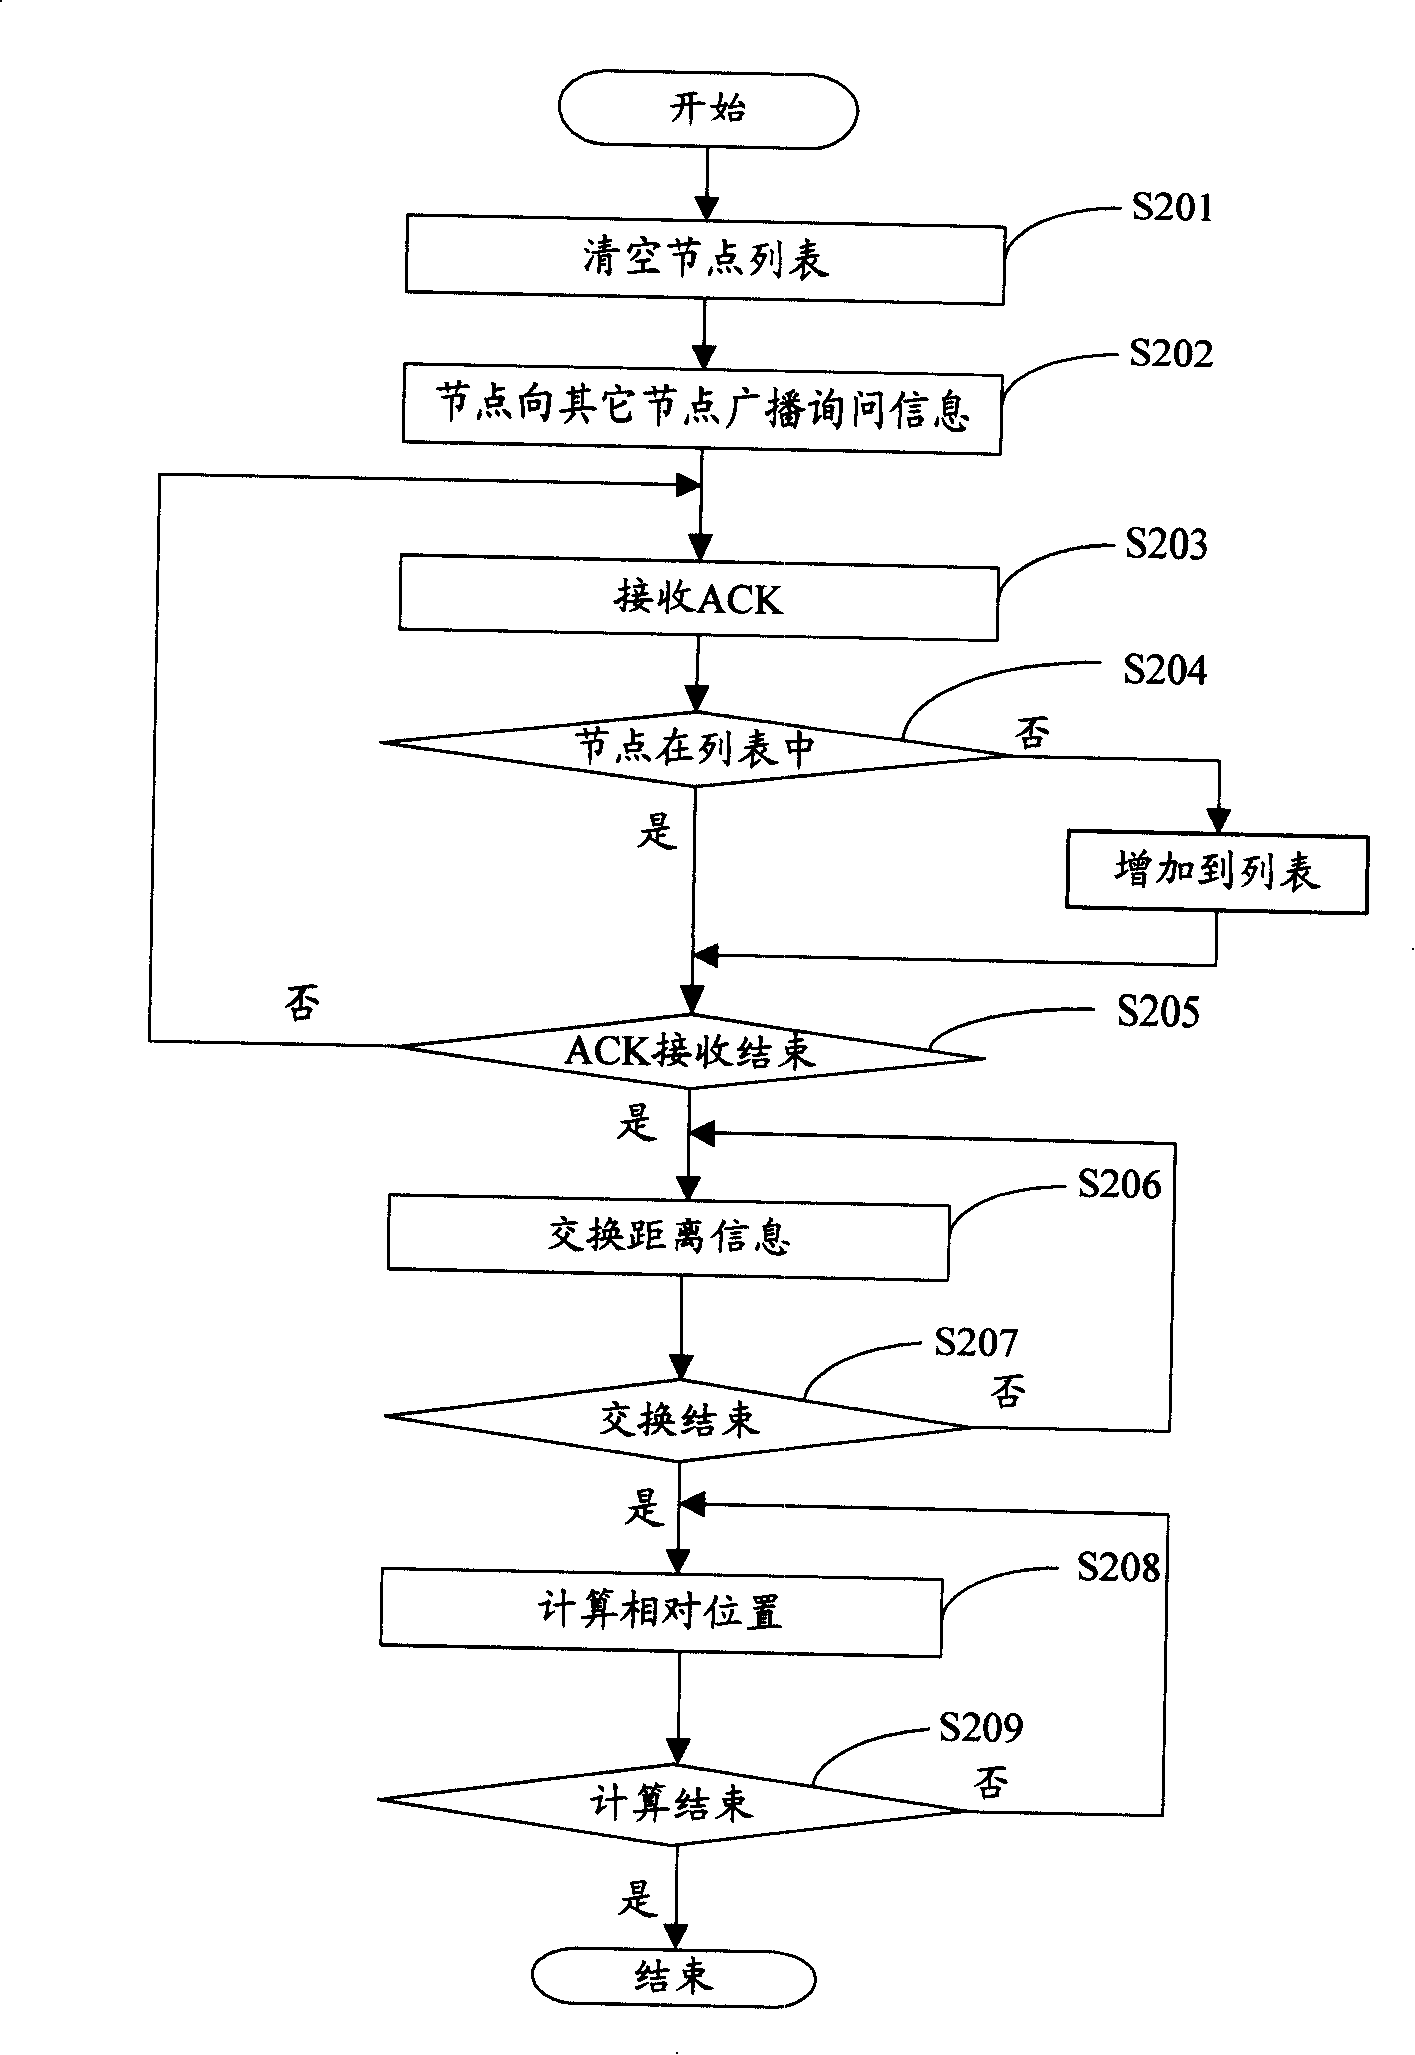 Method and system for ascertaining relative position of network node